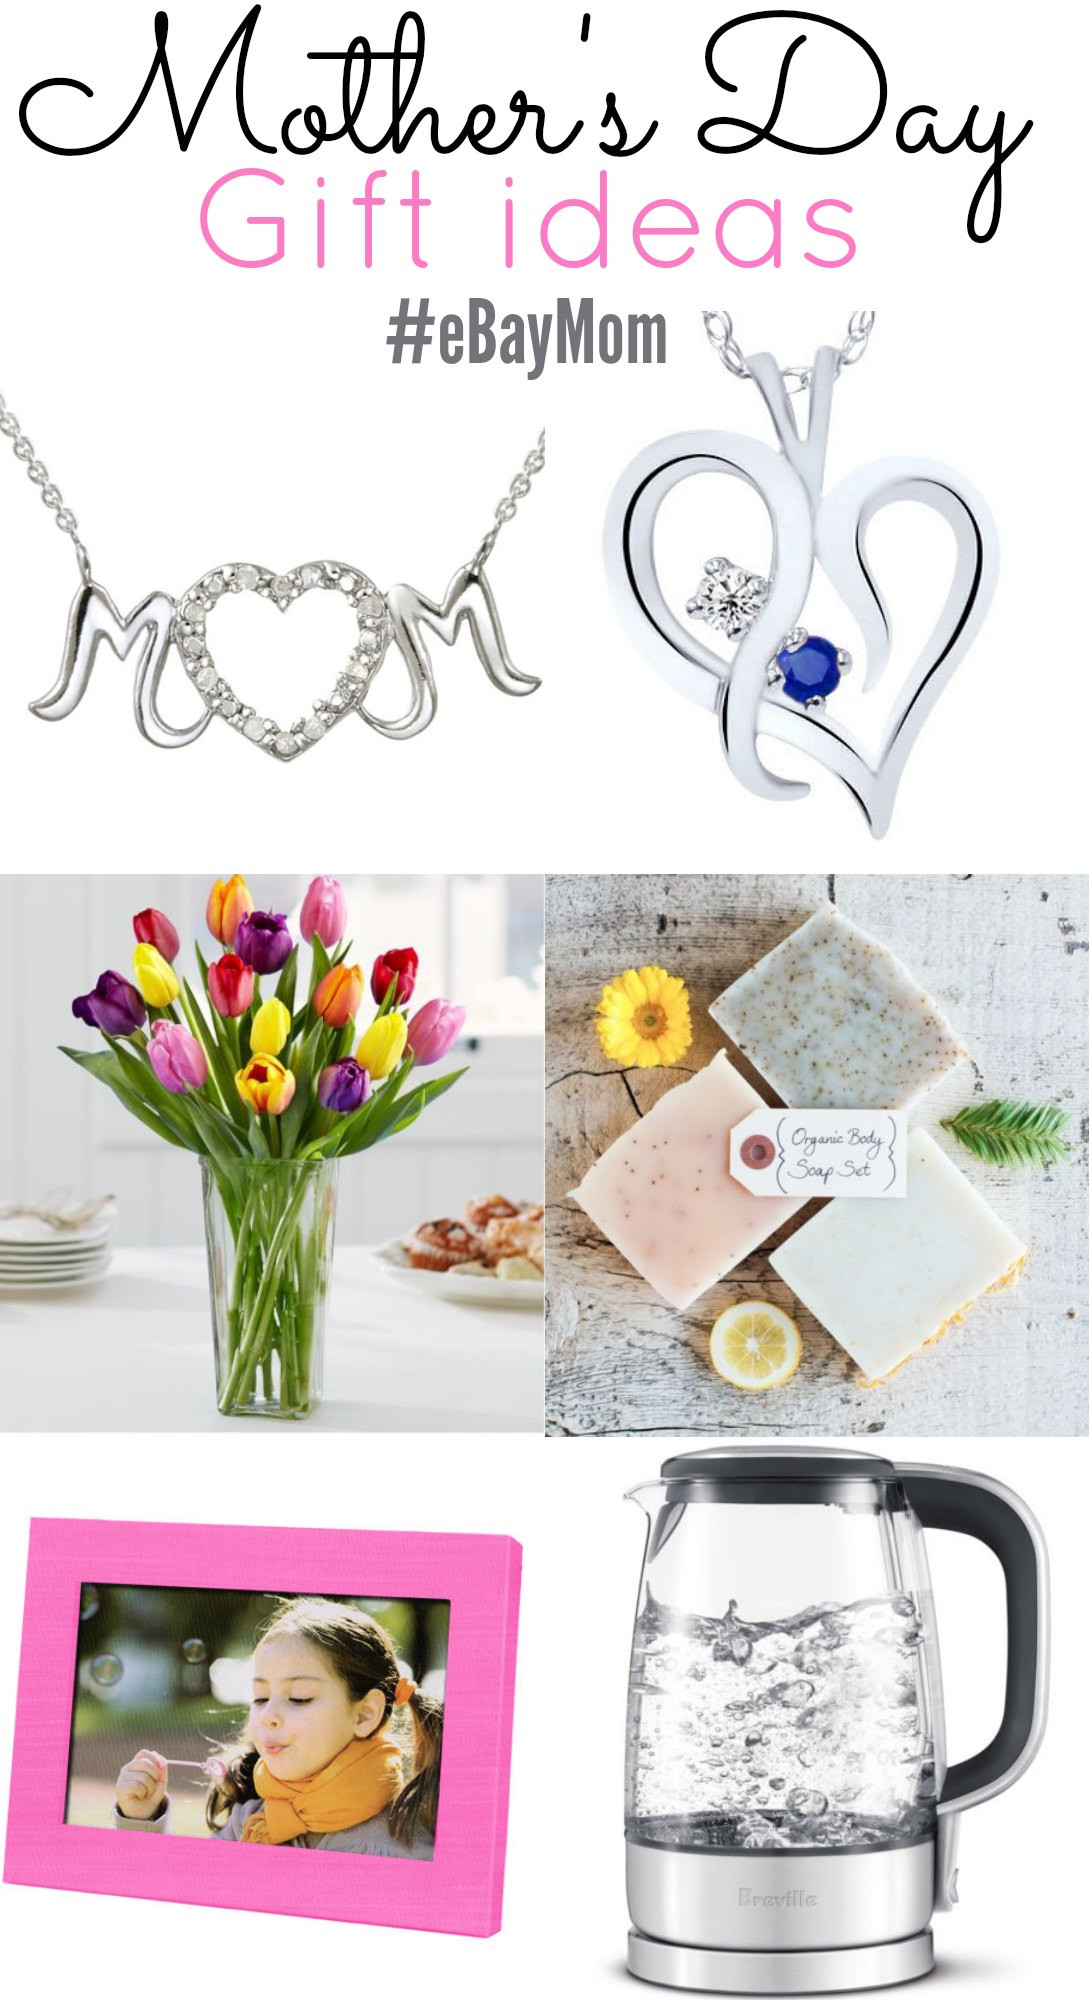 Amazon Mothers Day Gift Ideas
 Mother’s Day Gift Ideas & Sweepstakes eBayMom ad